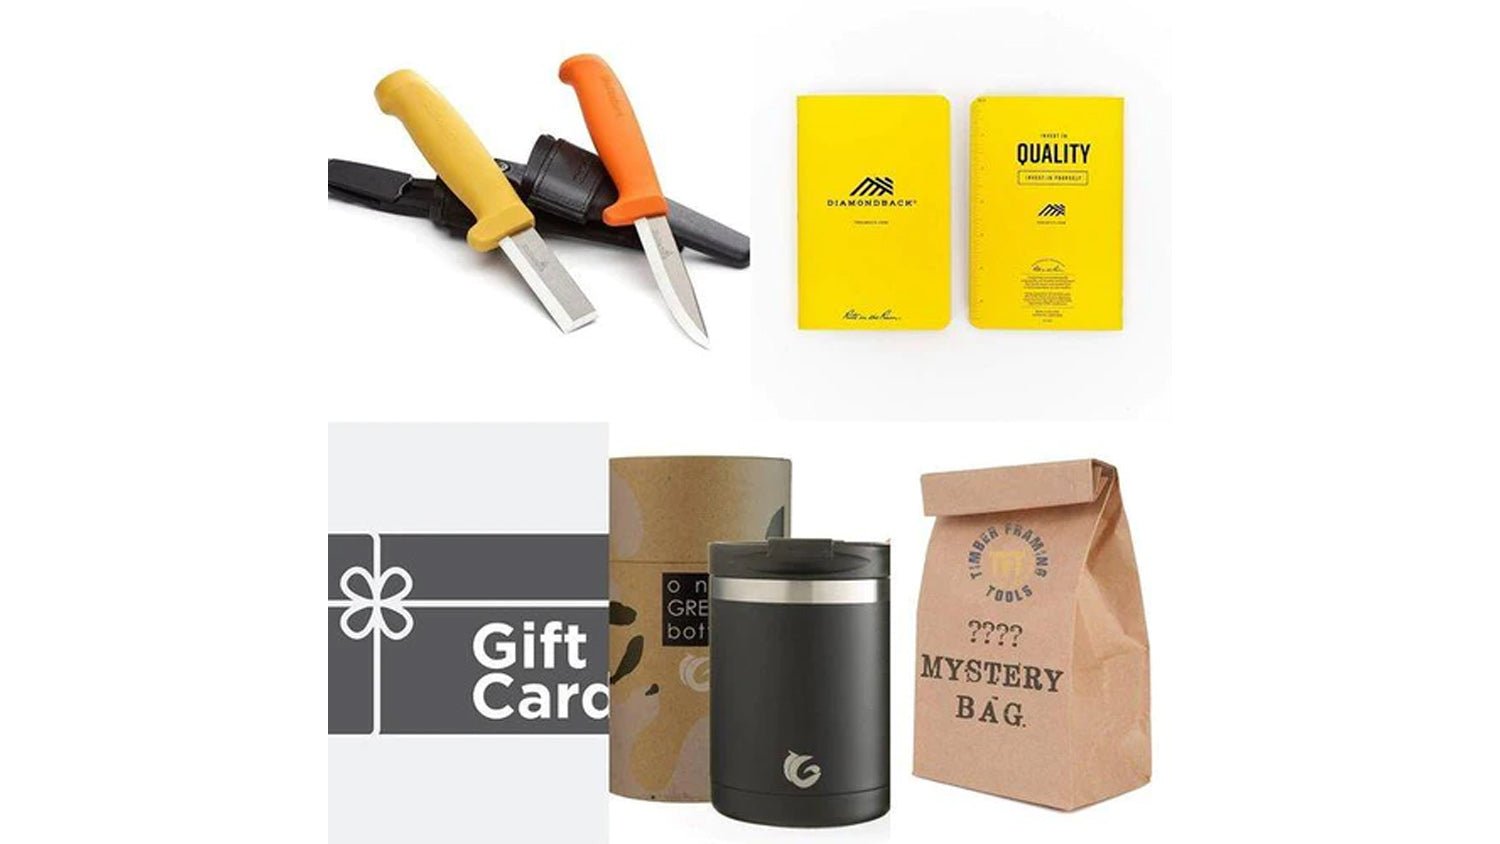 Last Minute Gifts for Father's Day!! 💛 - TF Tools Ltd